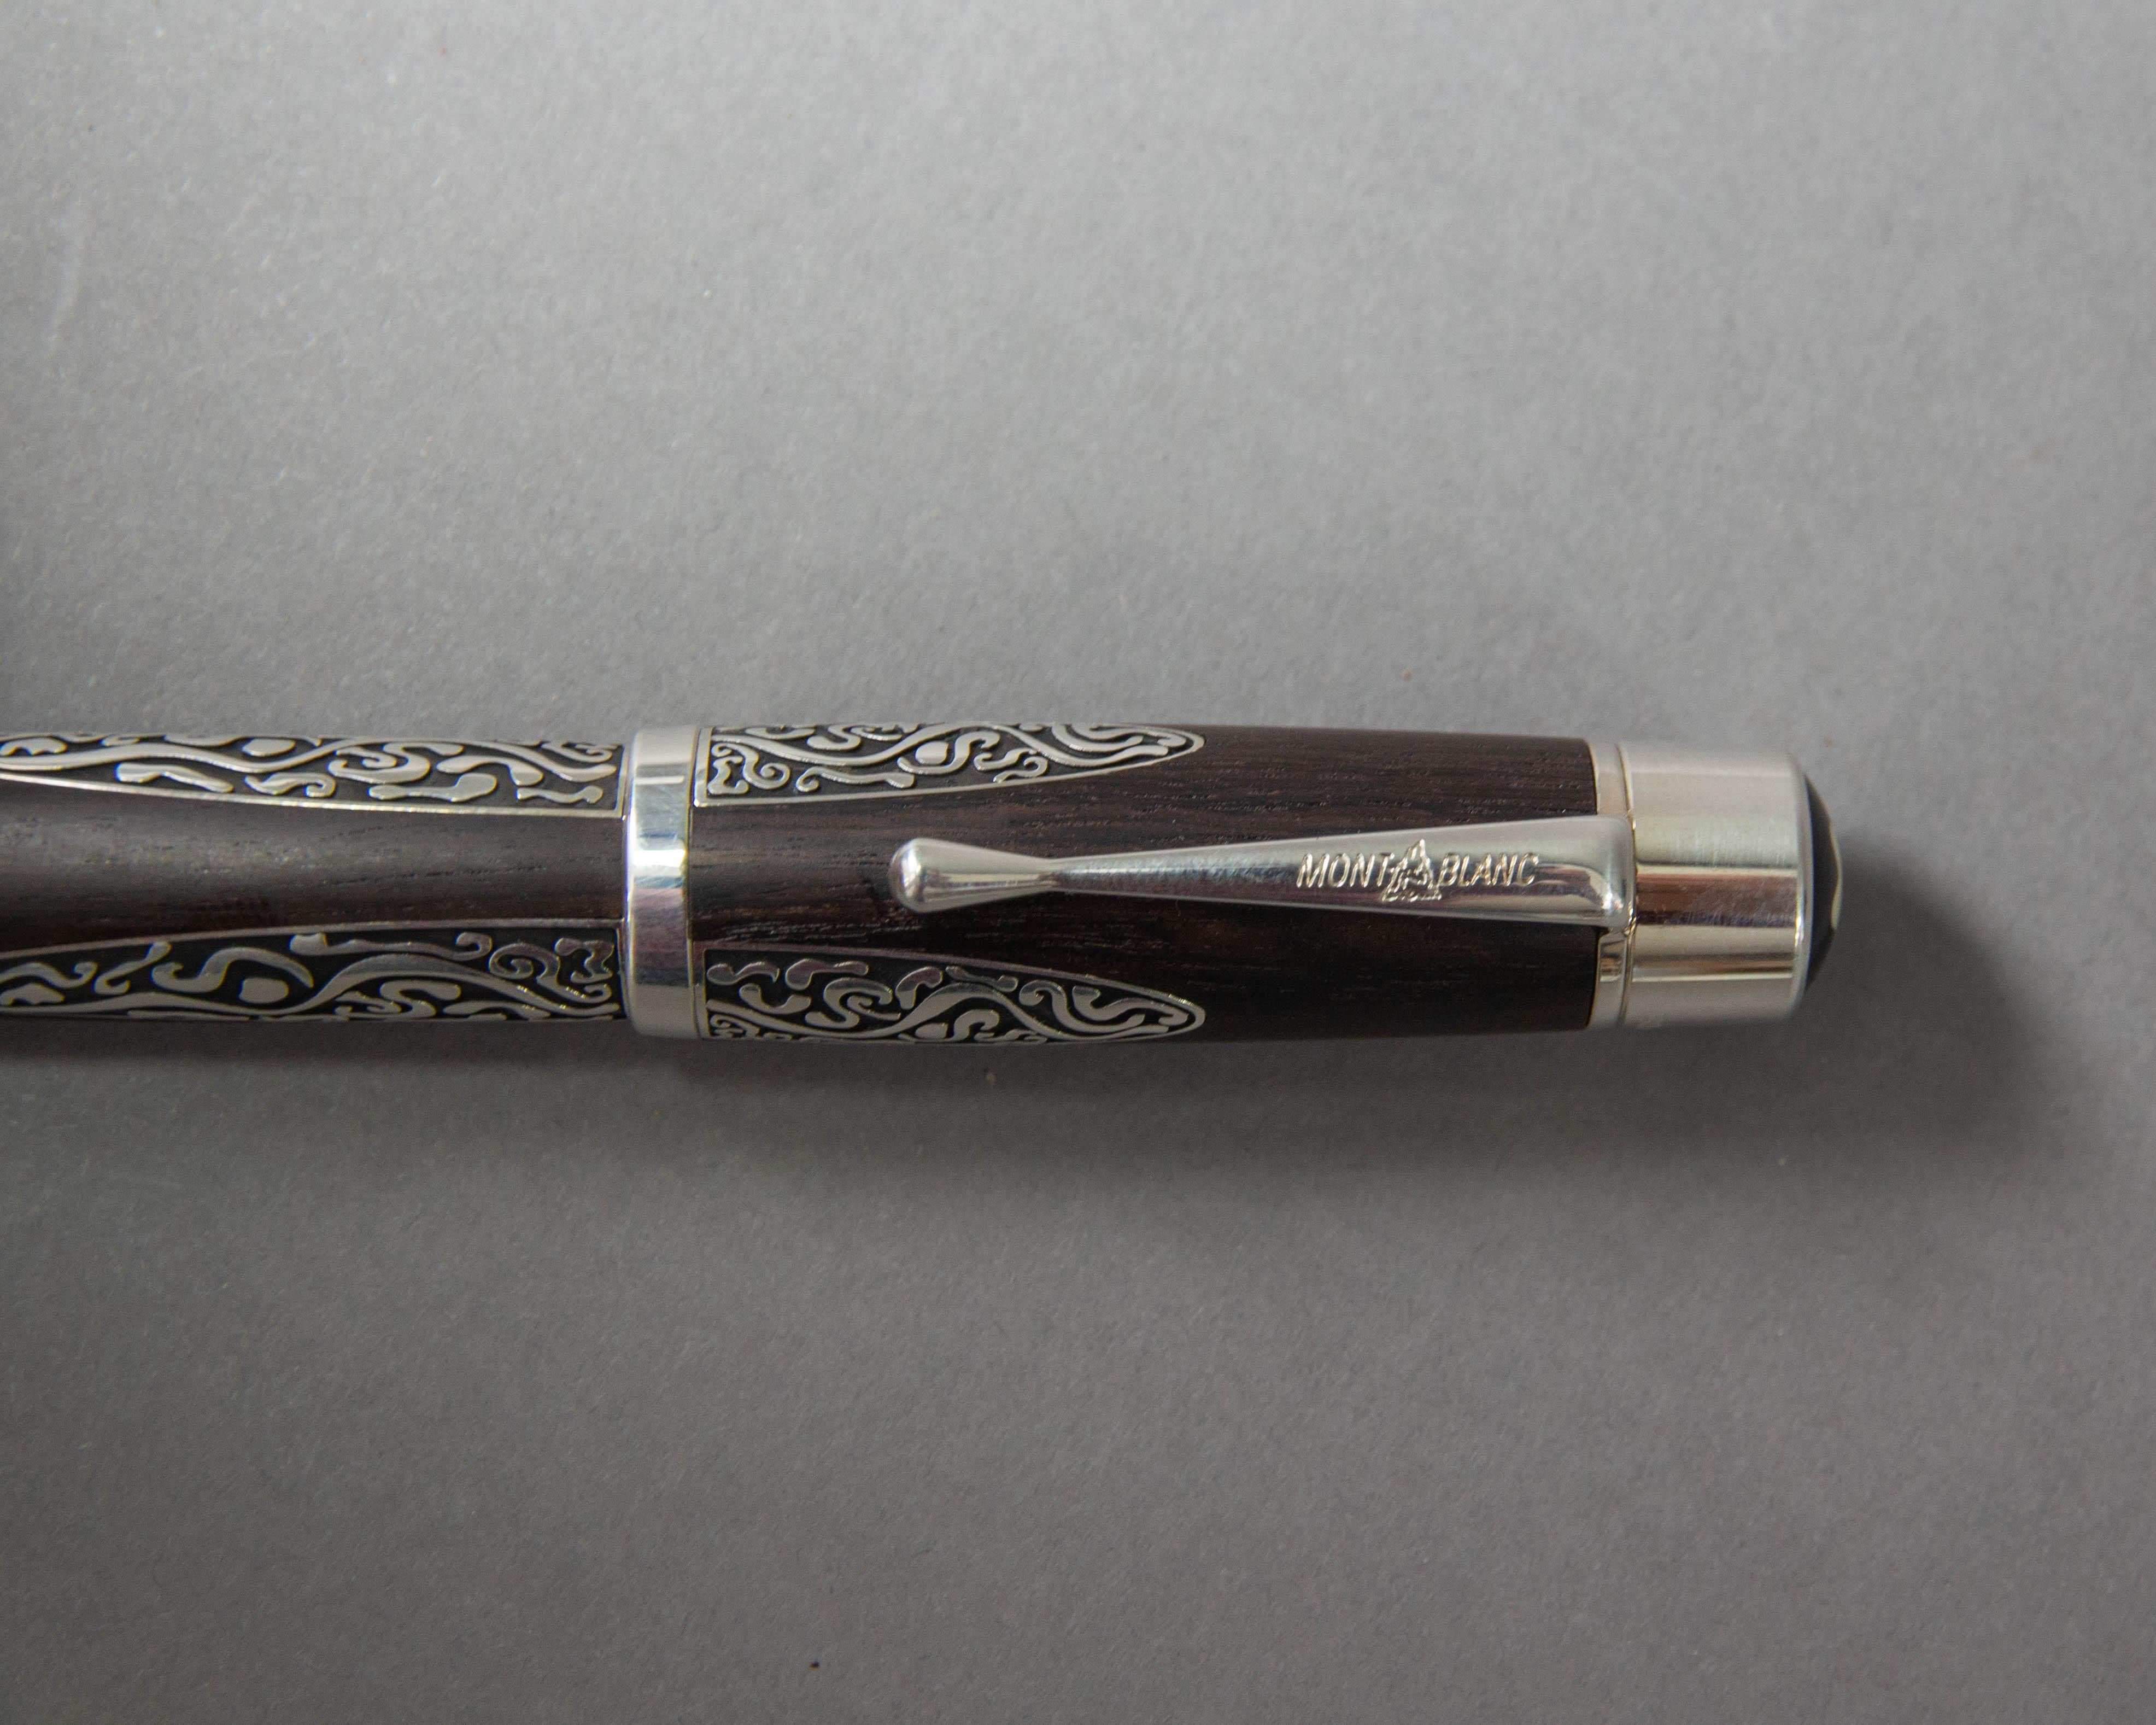 Contemporary New Montblanc Limited Edition Alexander von Humboldt Fountain Pen 1905/4810 with